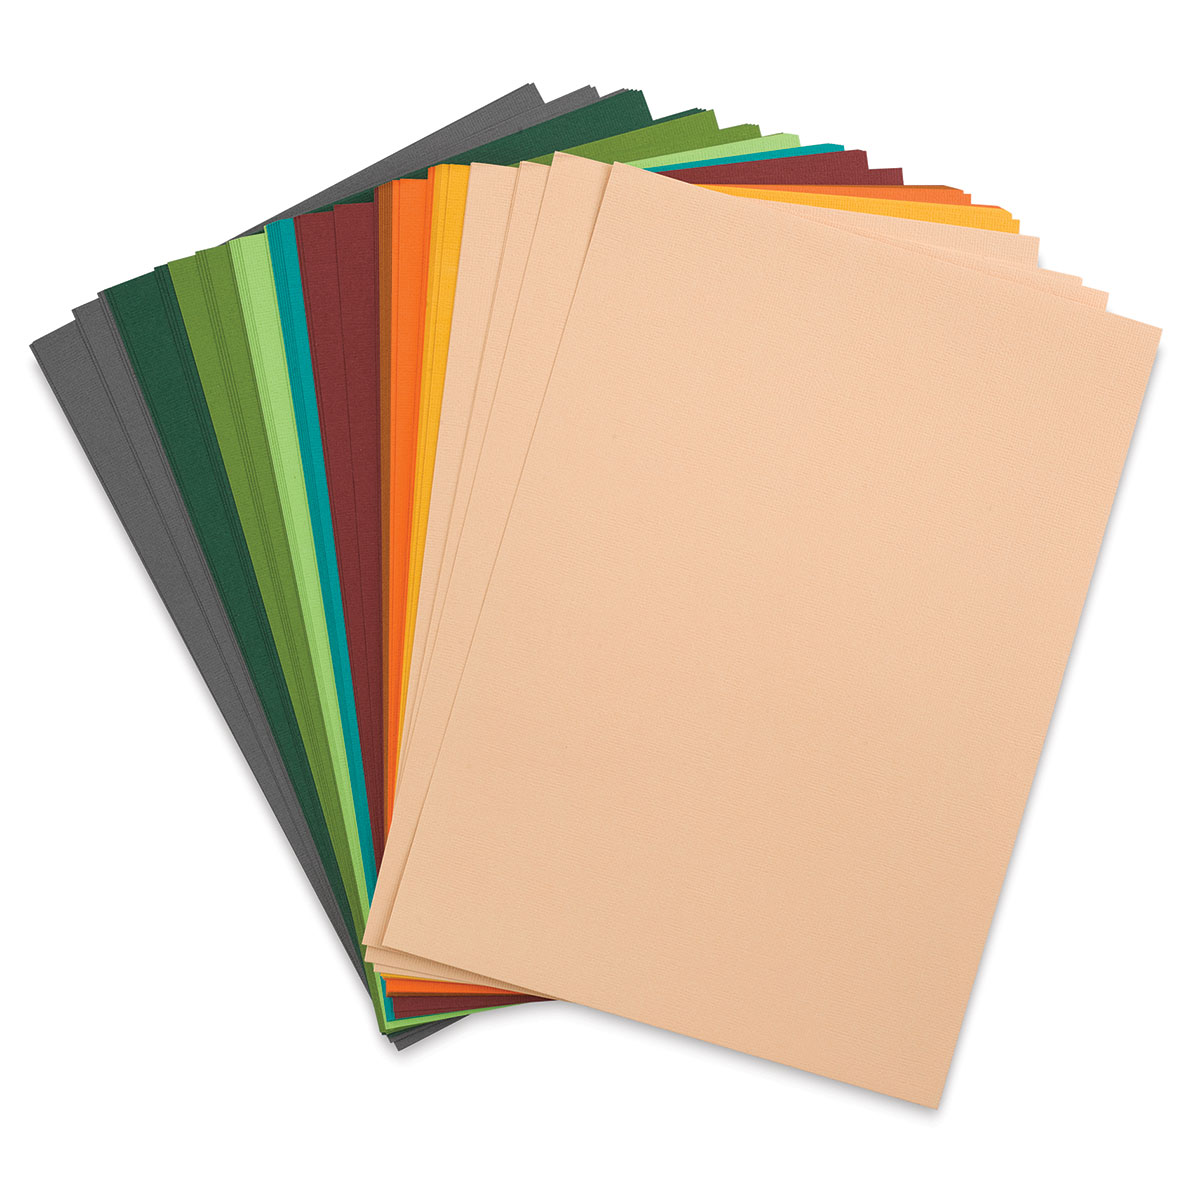 Sizzix Surfacez Cardstock - Eclectic Colors, Package of 60 Sheets, 8-1/4W x 11-3/4L, 216 gsm